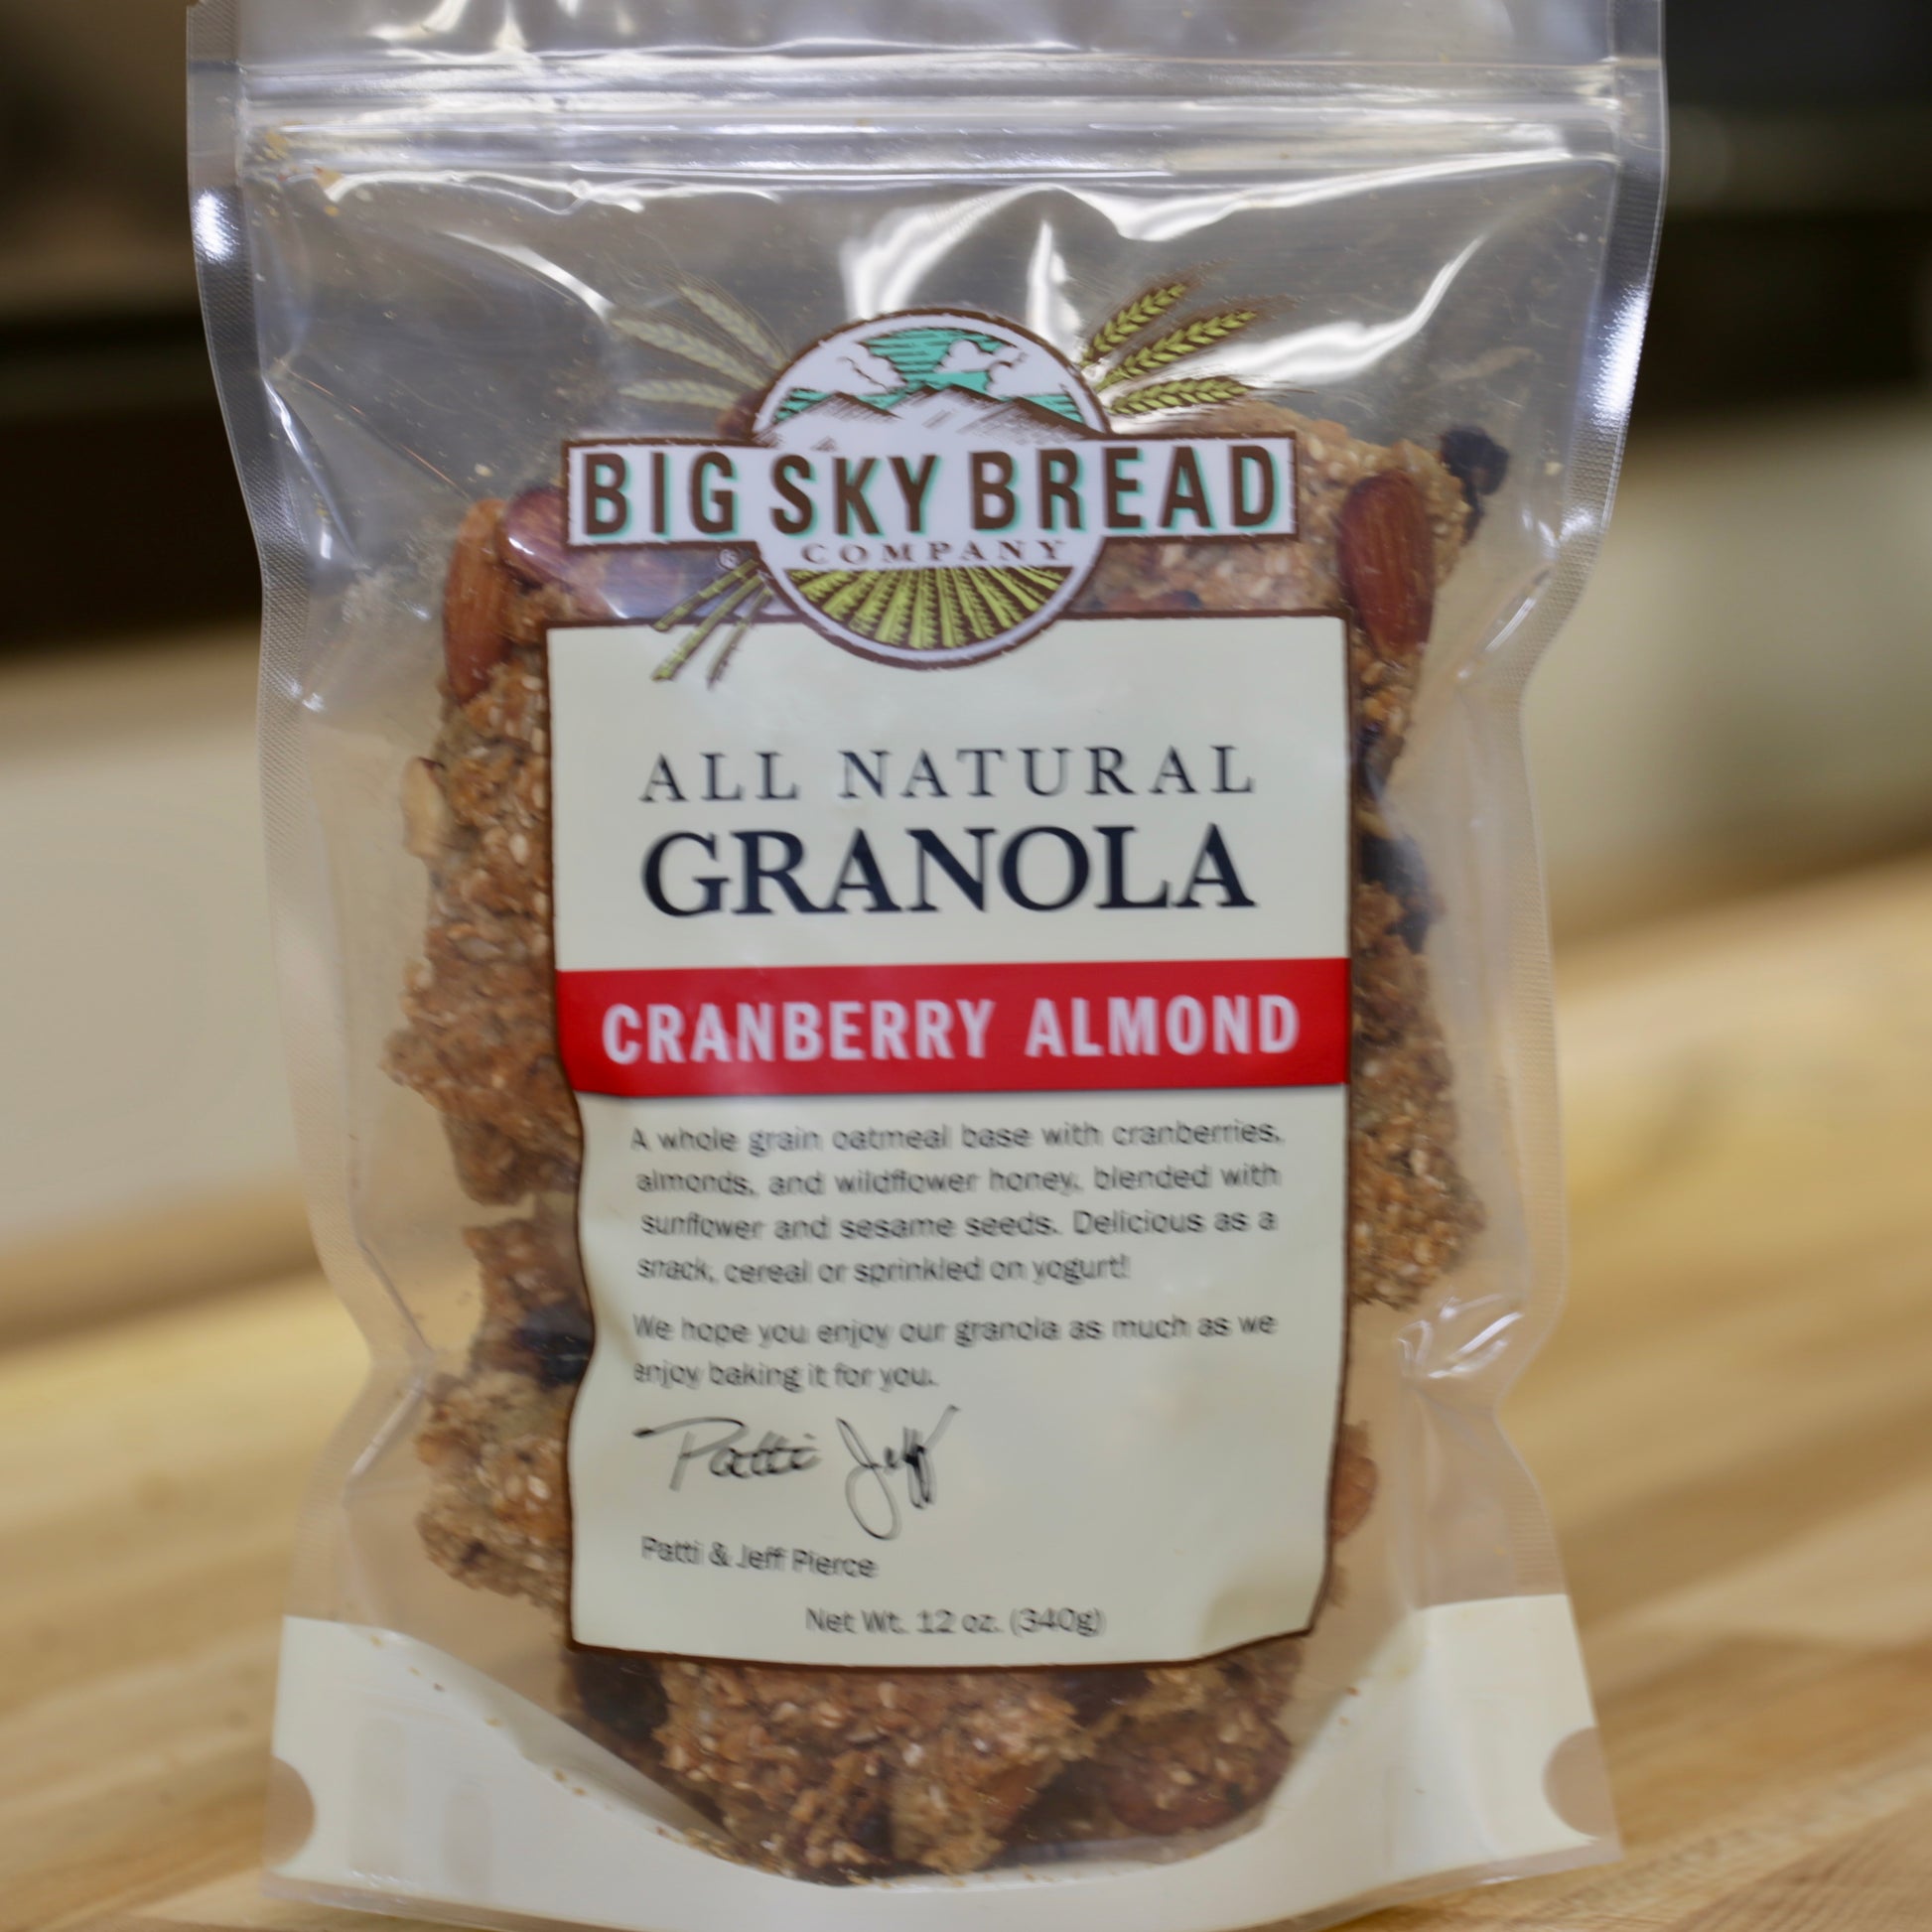 Big Sky Bread Company Whole Grain Granola. A whole grain oatmeal base featuring apple juice sweetened cranberries, California almonds, wildflower honey and a perfect blend of sesame and sunflower seeds.